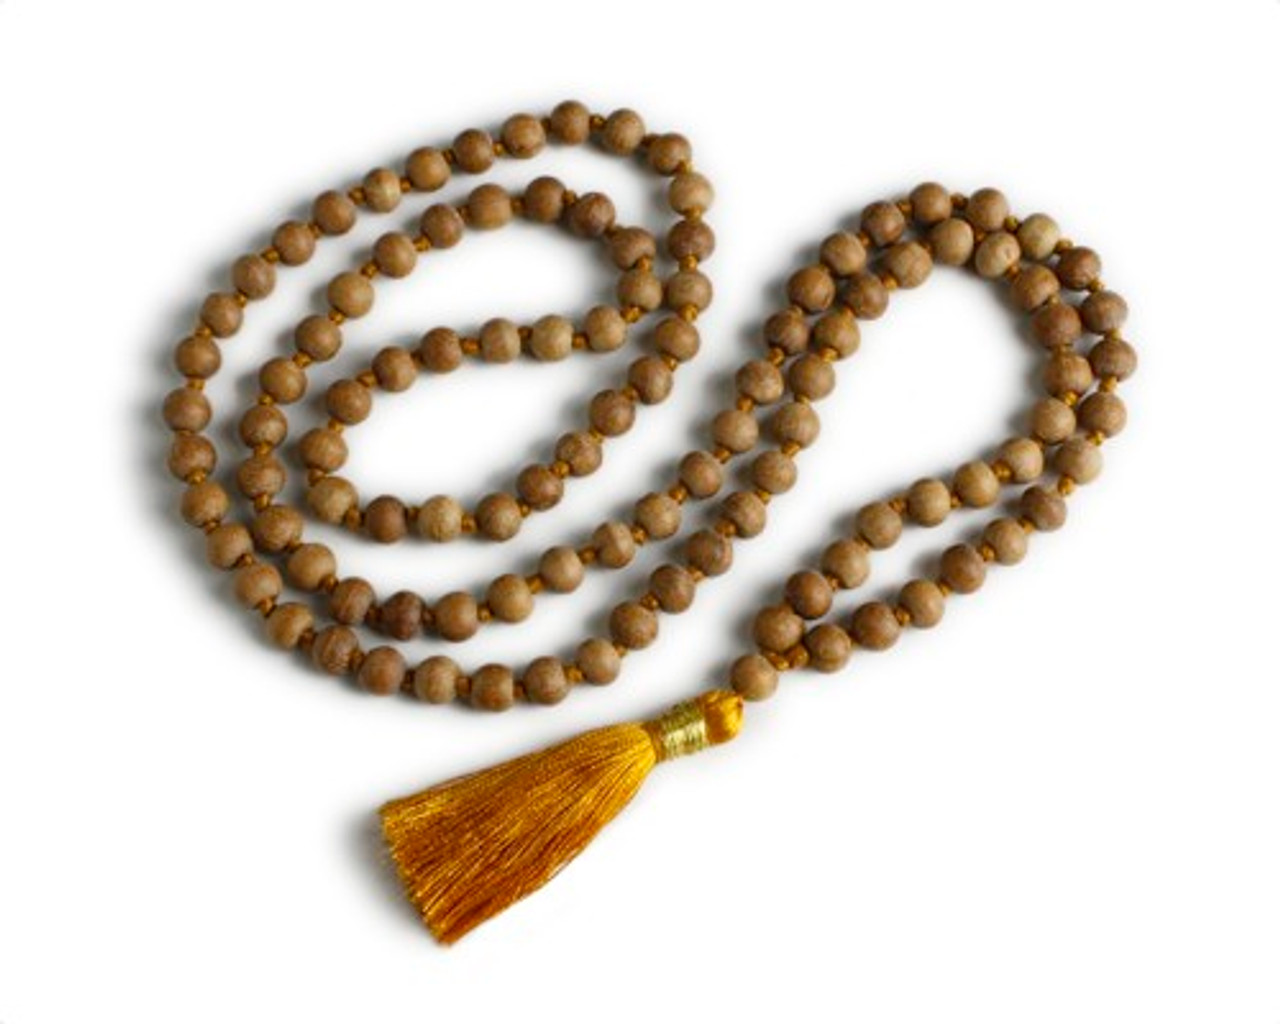 How to Use Mala Beads for Meditation – MalaBeads